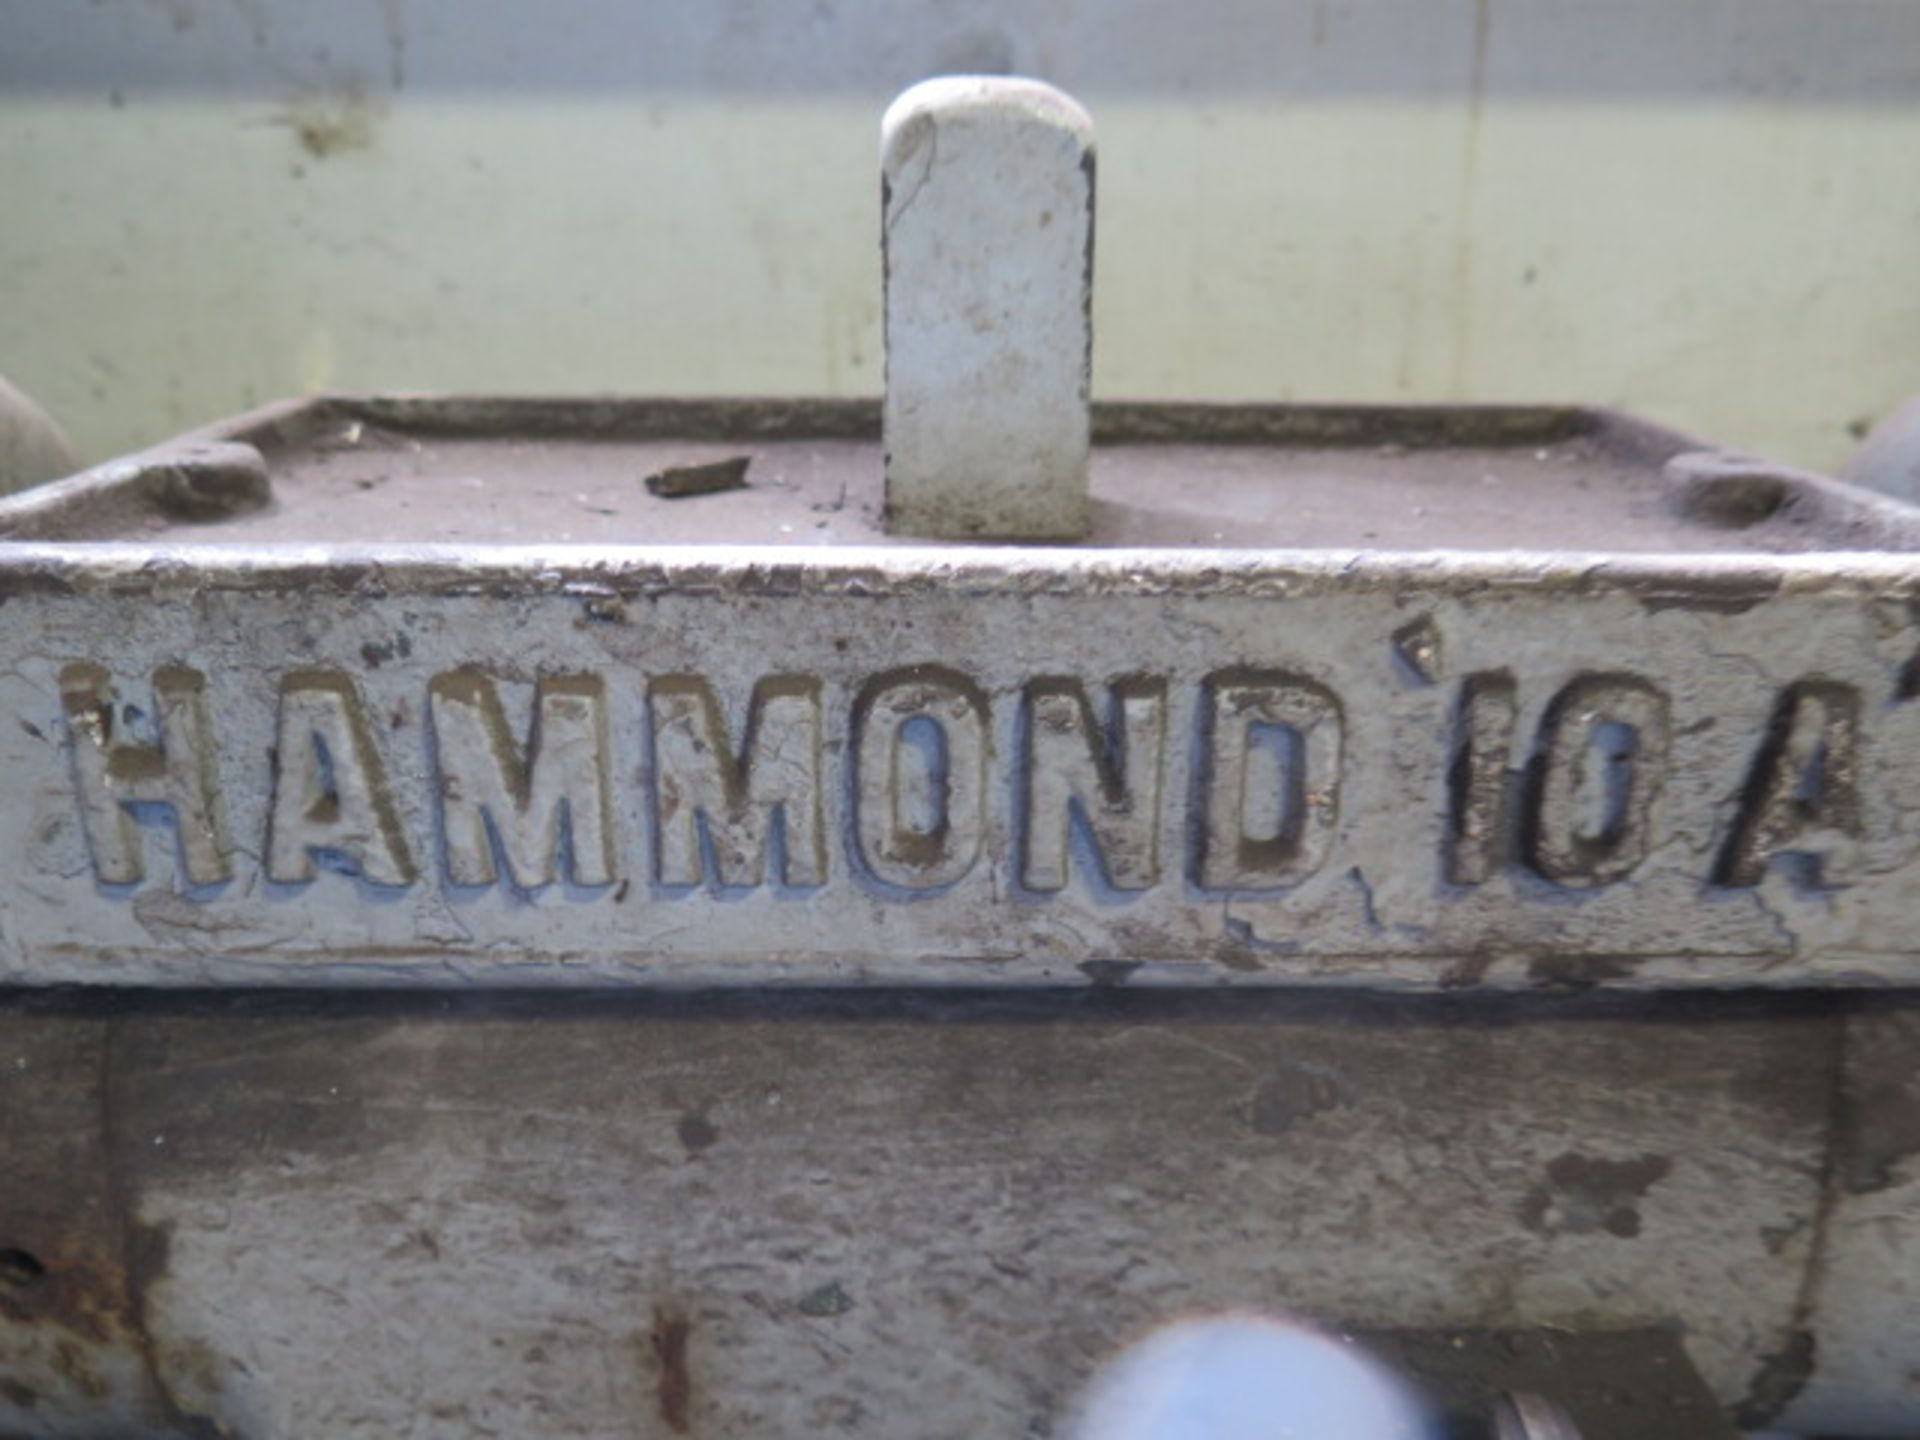 Hammond 10A Pedestal Tool Grinder (SOLD AS-IS - NO WARRANTY) - Image 5 of 5